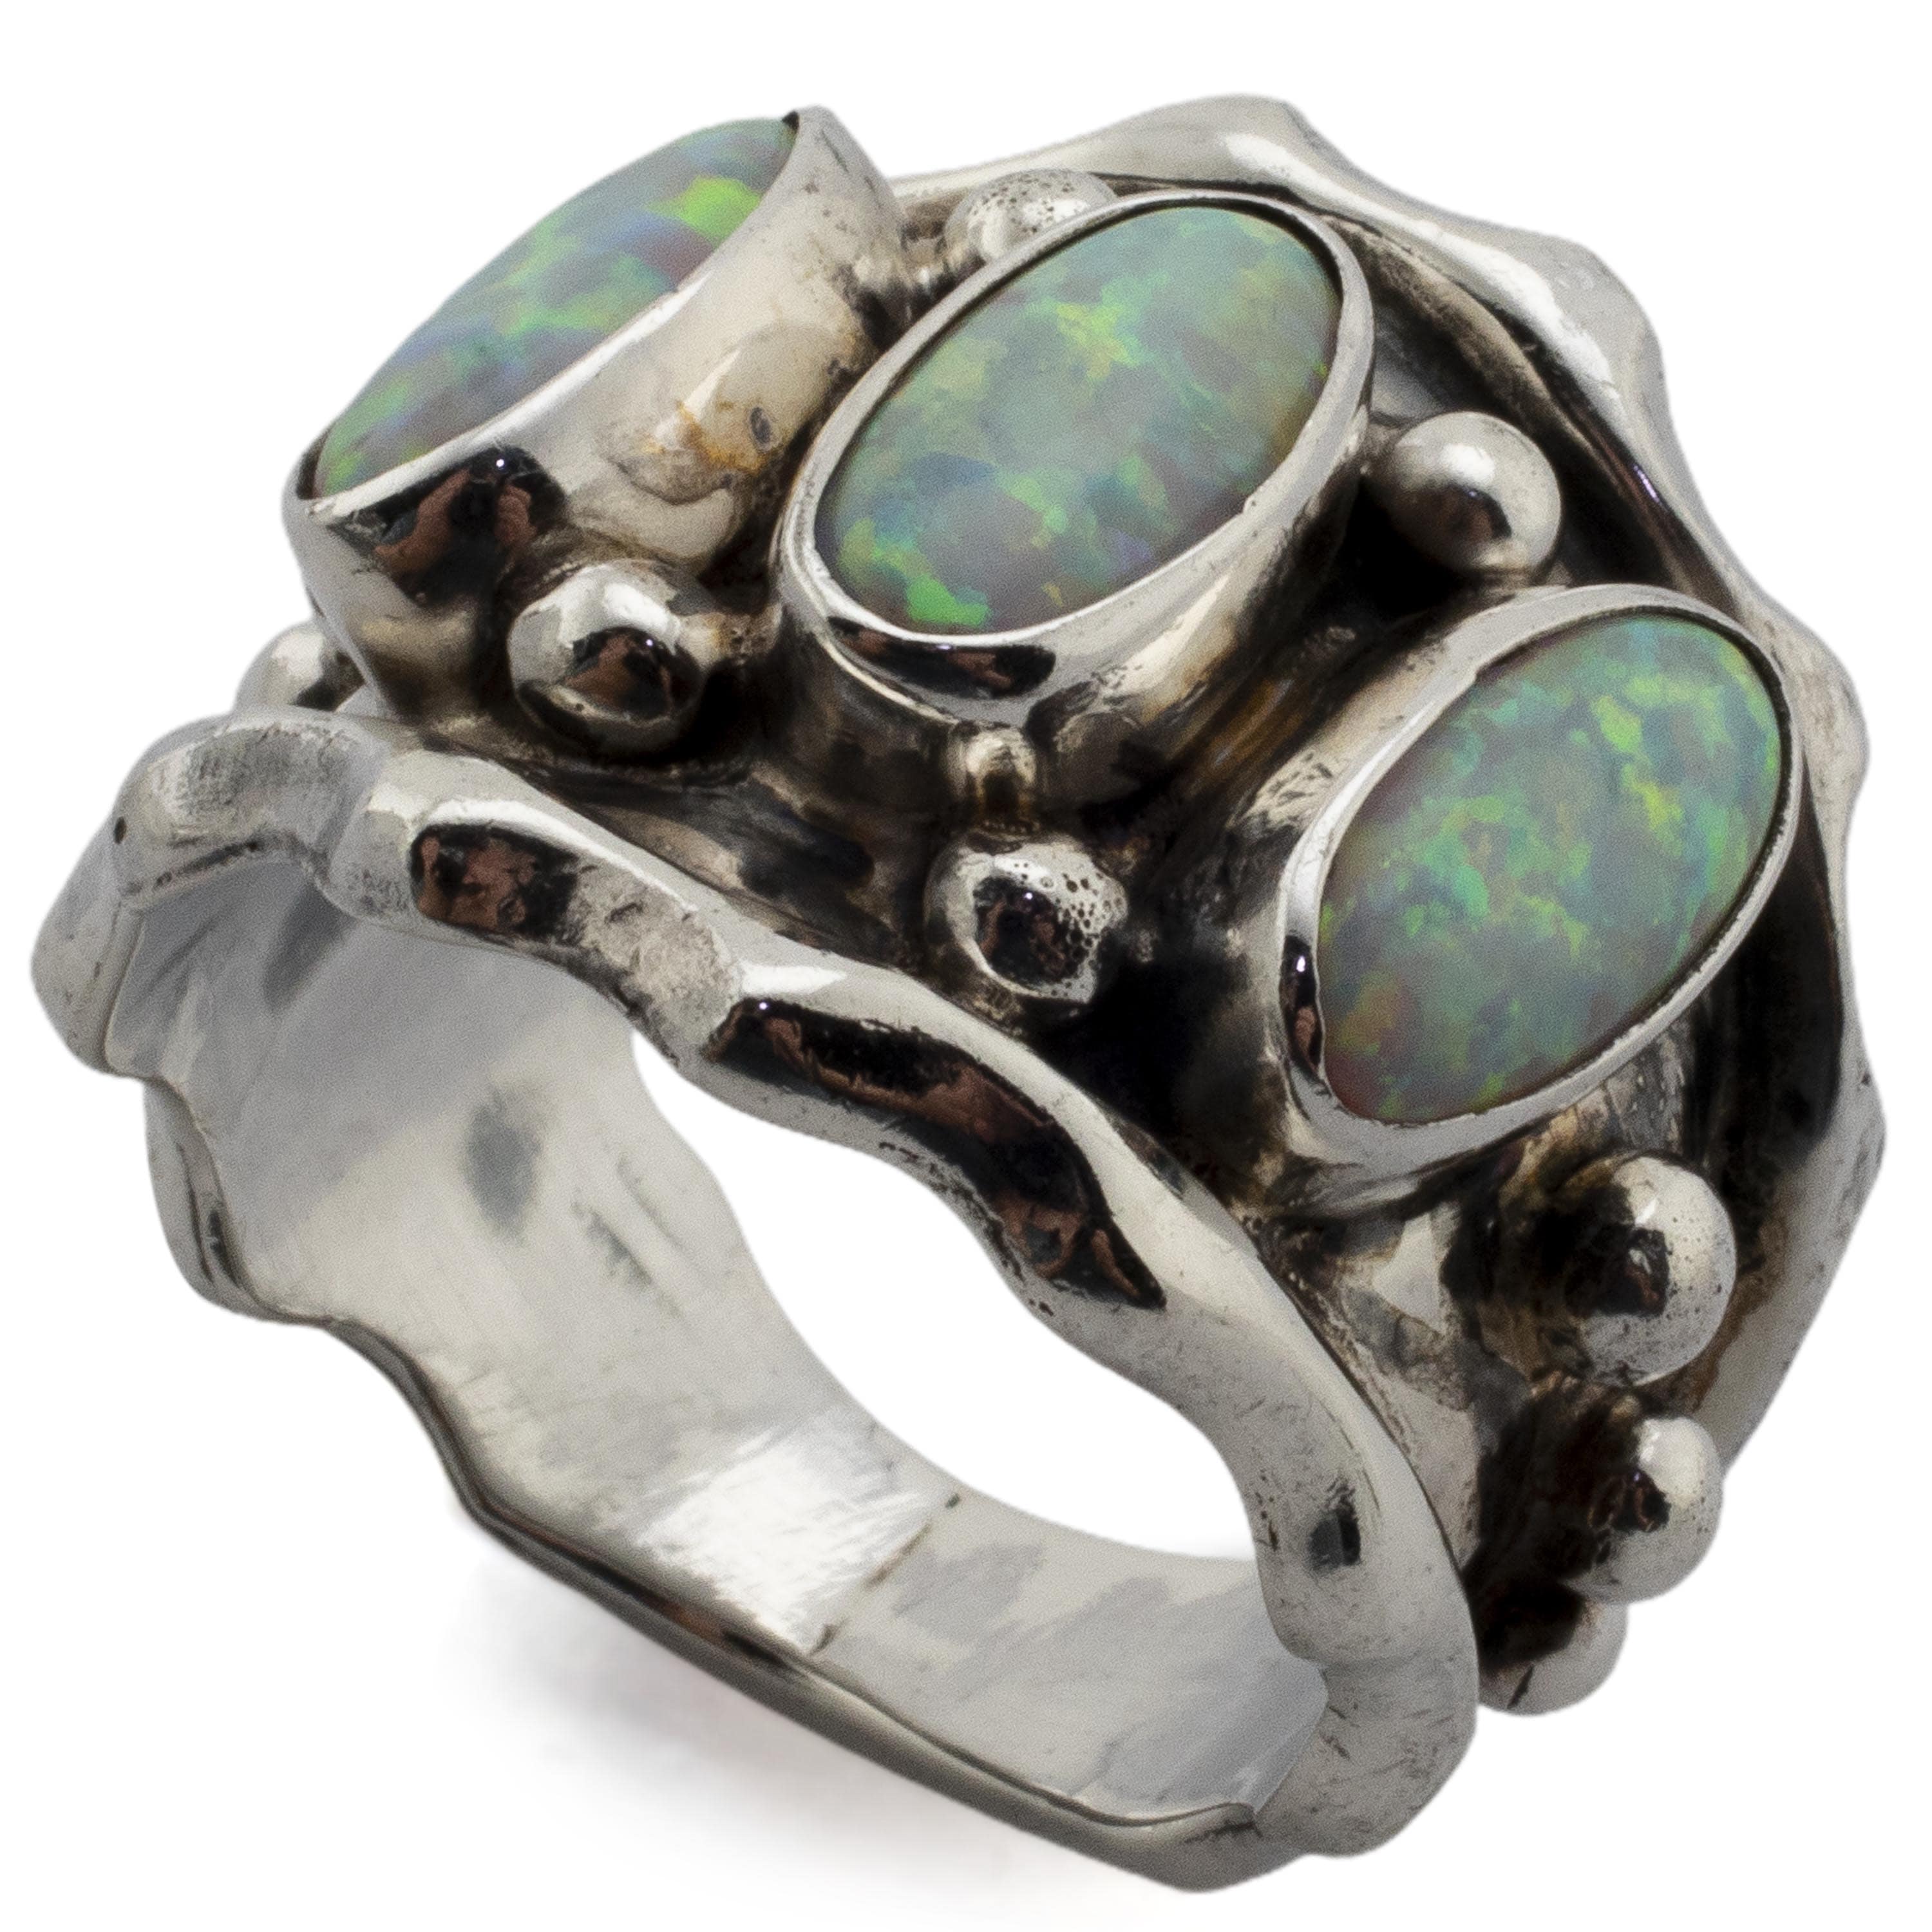 Kalifano Native American Jewelry Running Bear Triple White Opal USA Native American Made 925 Sterling Silver Ring